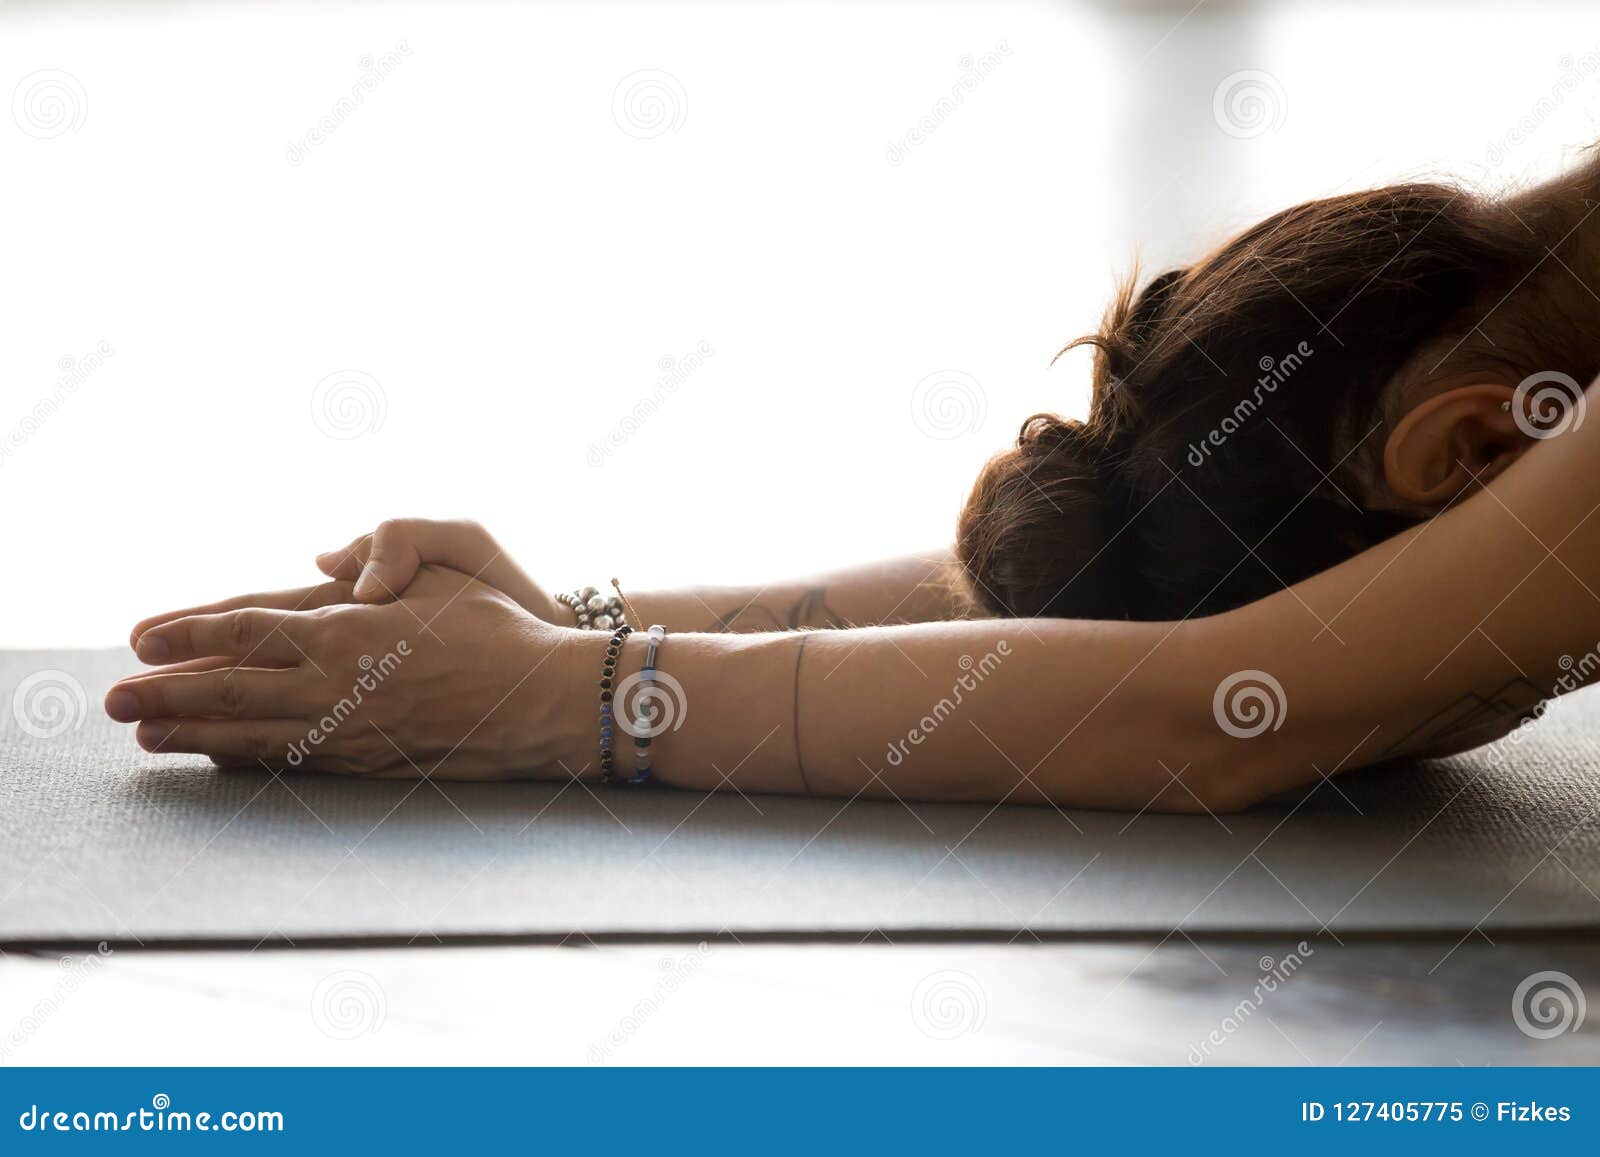 young woman practicing yoga, doing meditation exercise